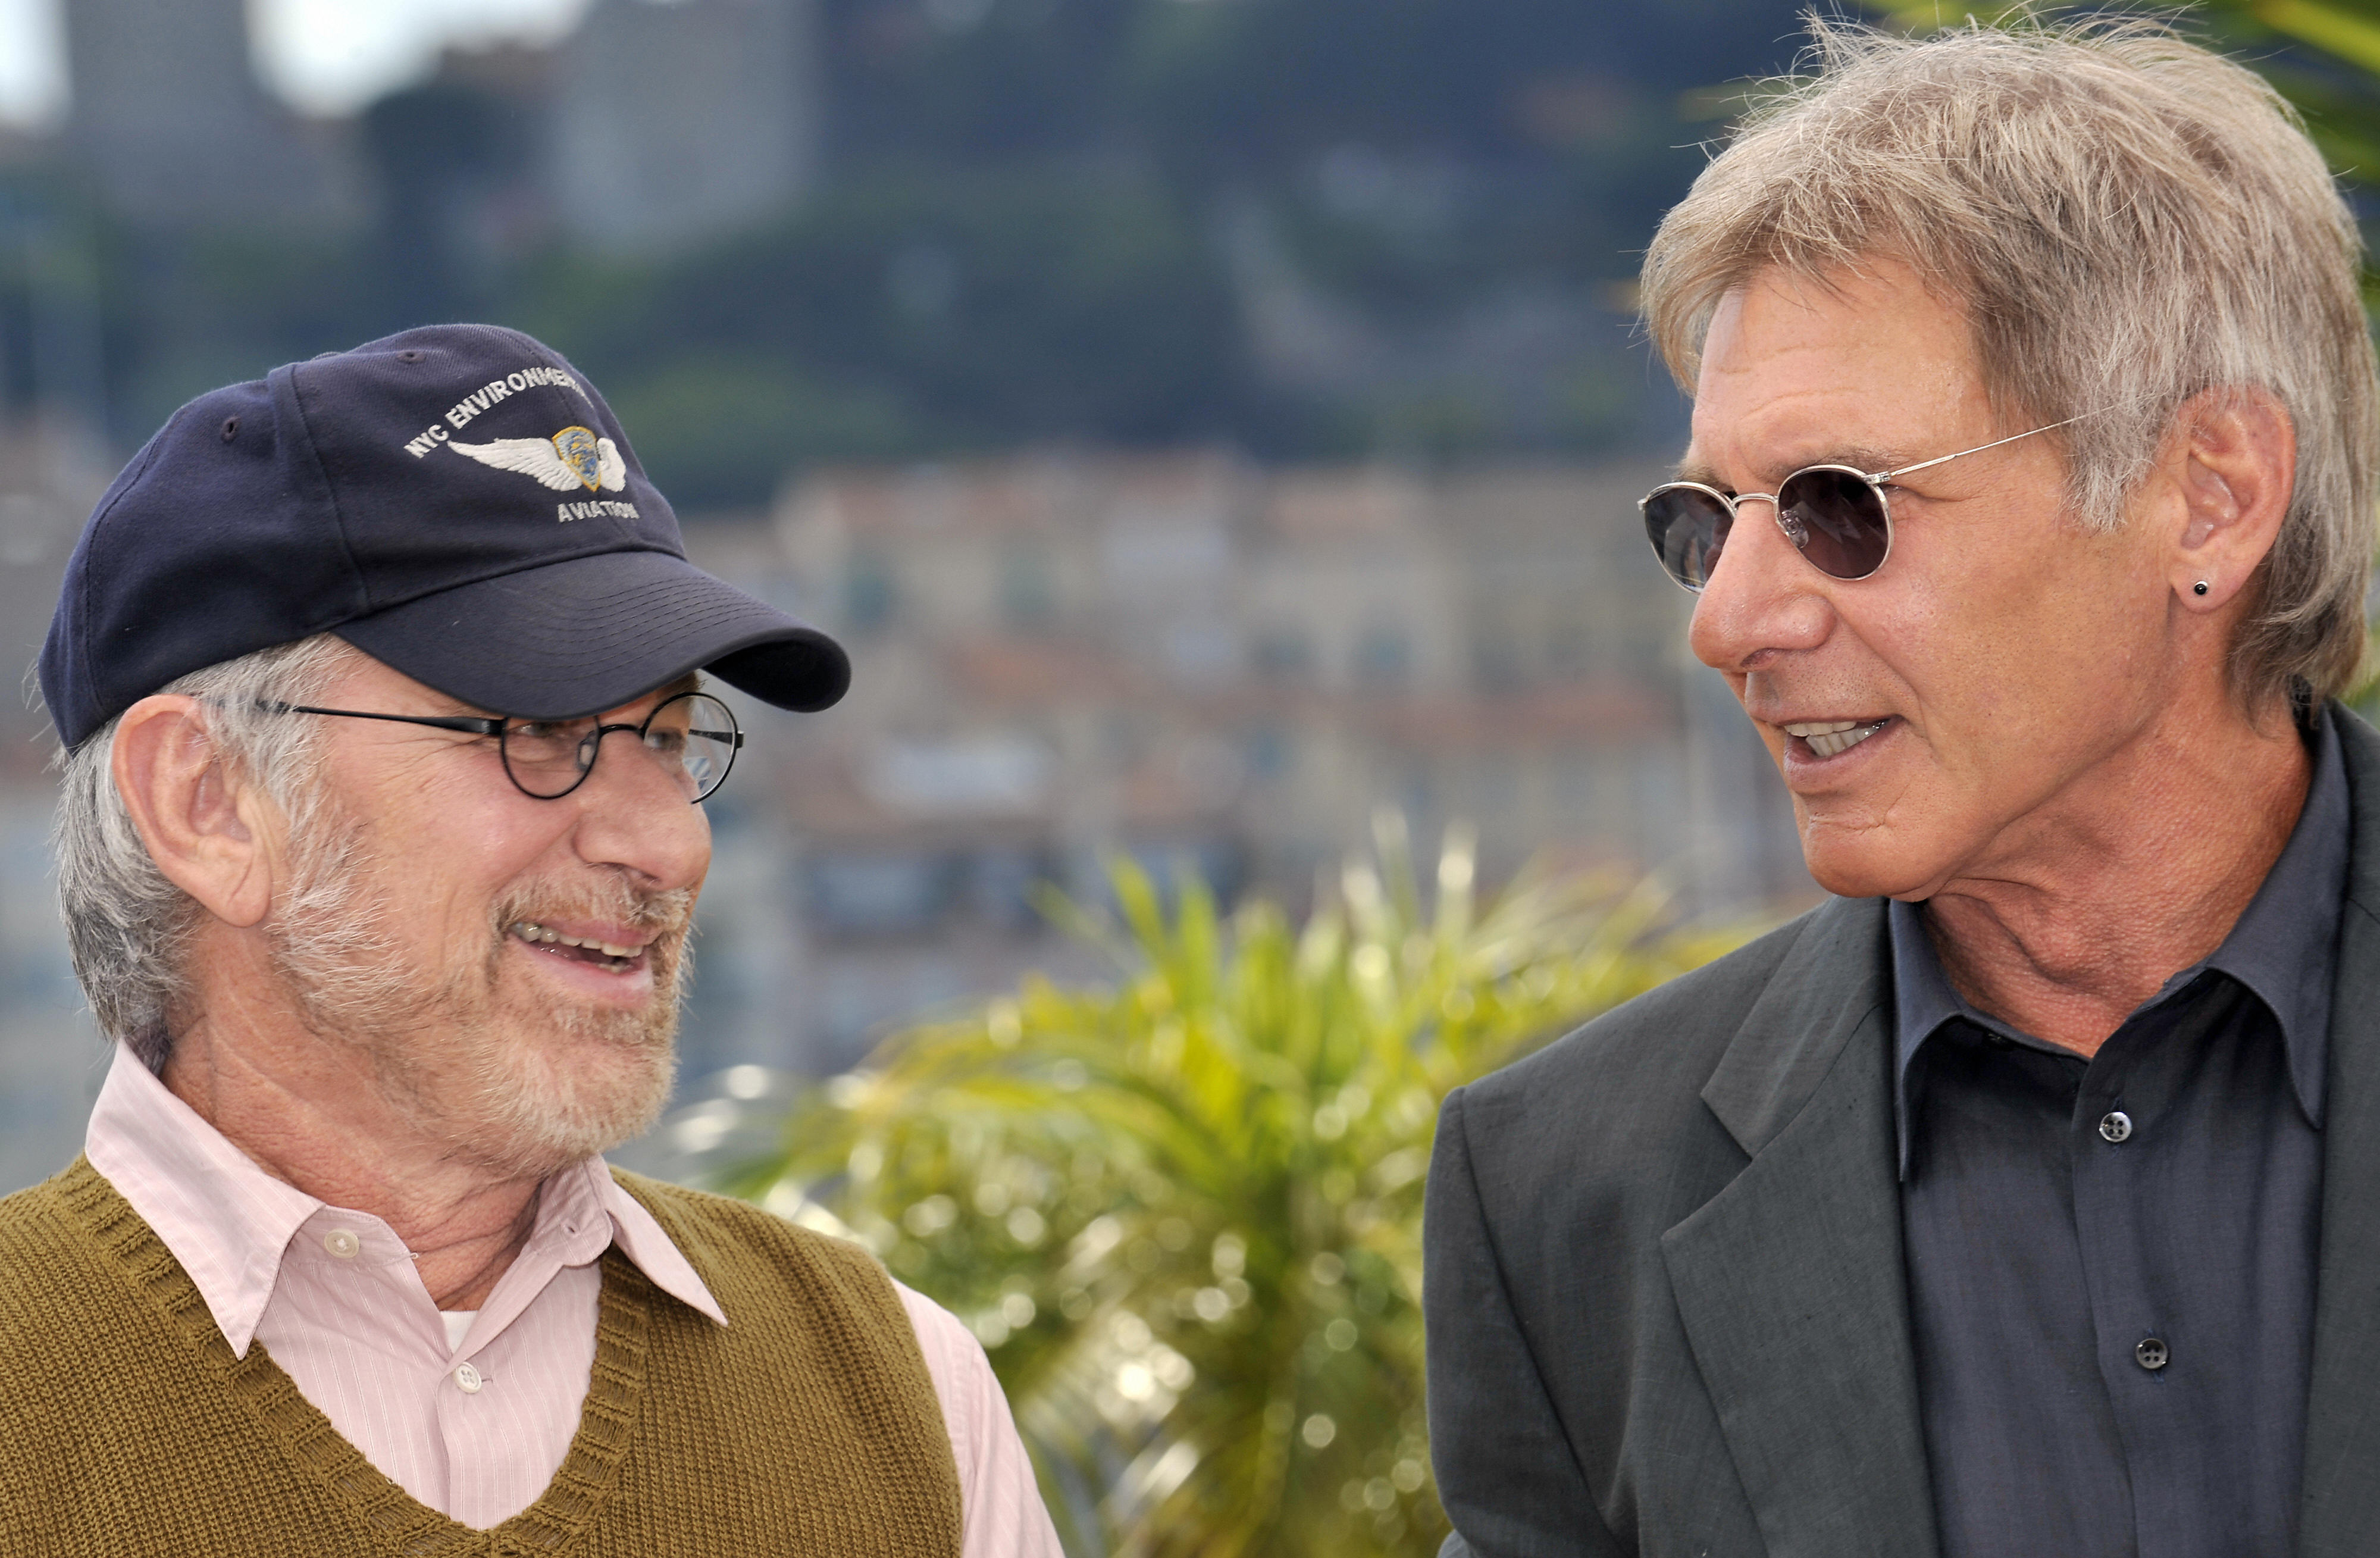 Director Steven Spielberg and Harrison Ford attend a photocall for the movie Indiana Jones and the Kingdom of the Crystal Skull